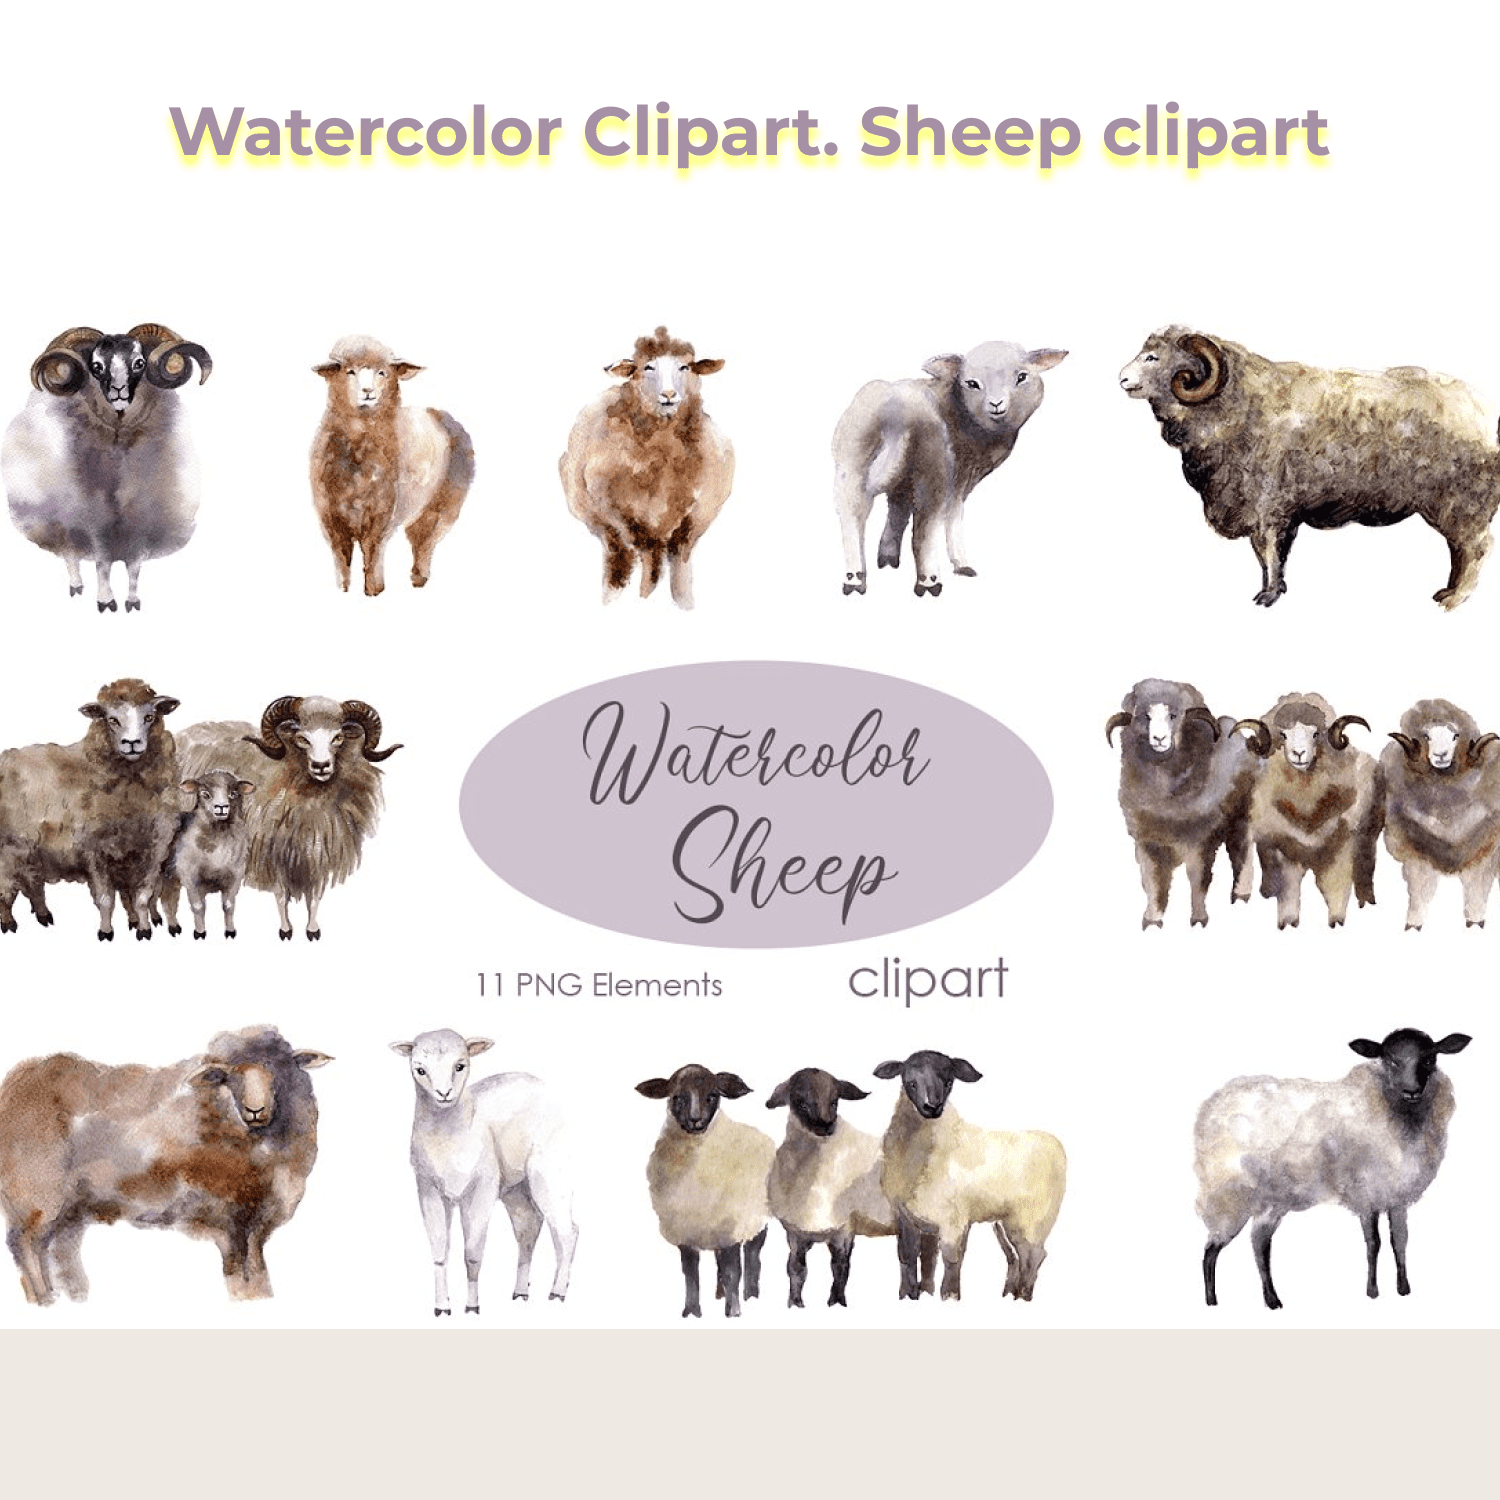 Watercolor Clipart. Sheep clipart.